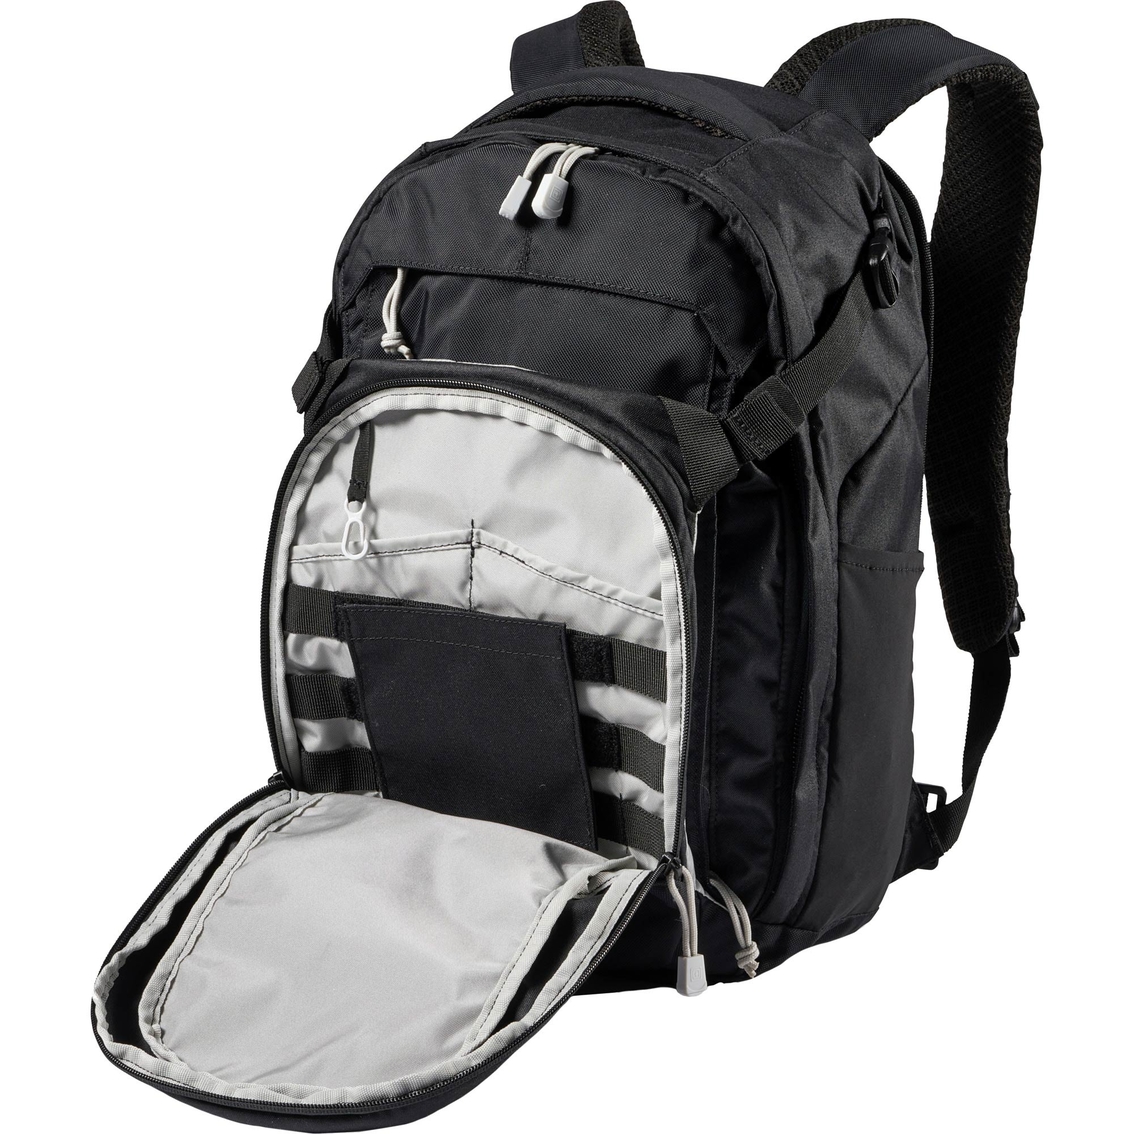 5.11 COVERT 18 2.0 Backpack - Image 9 of 10